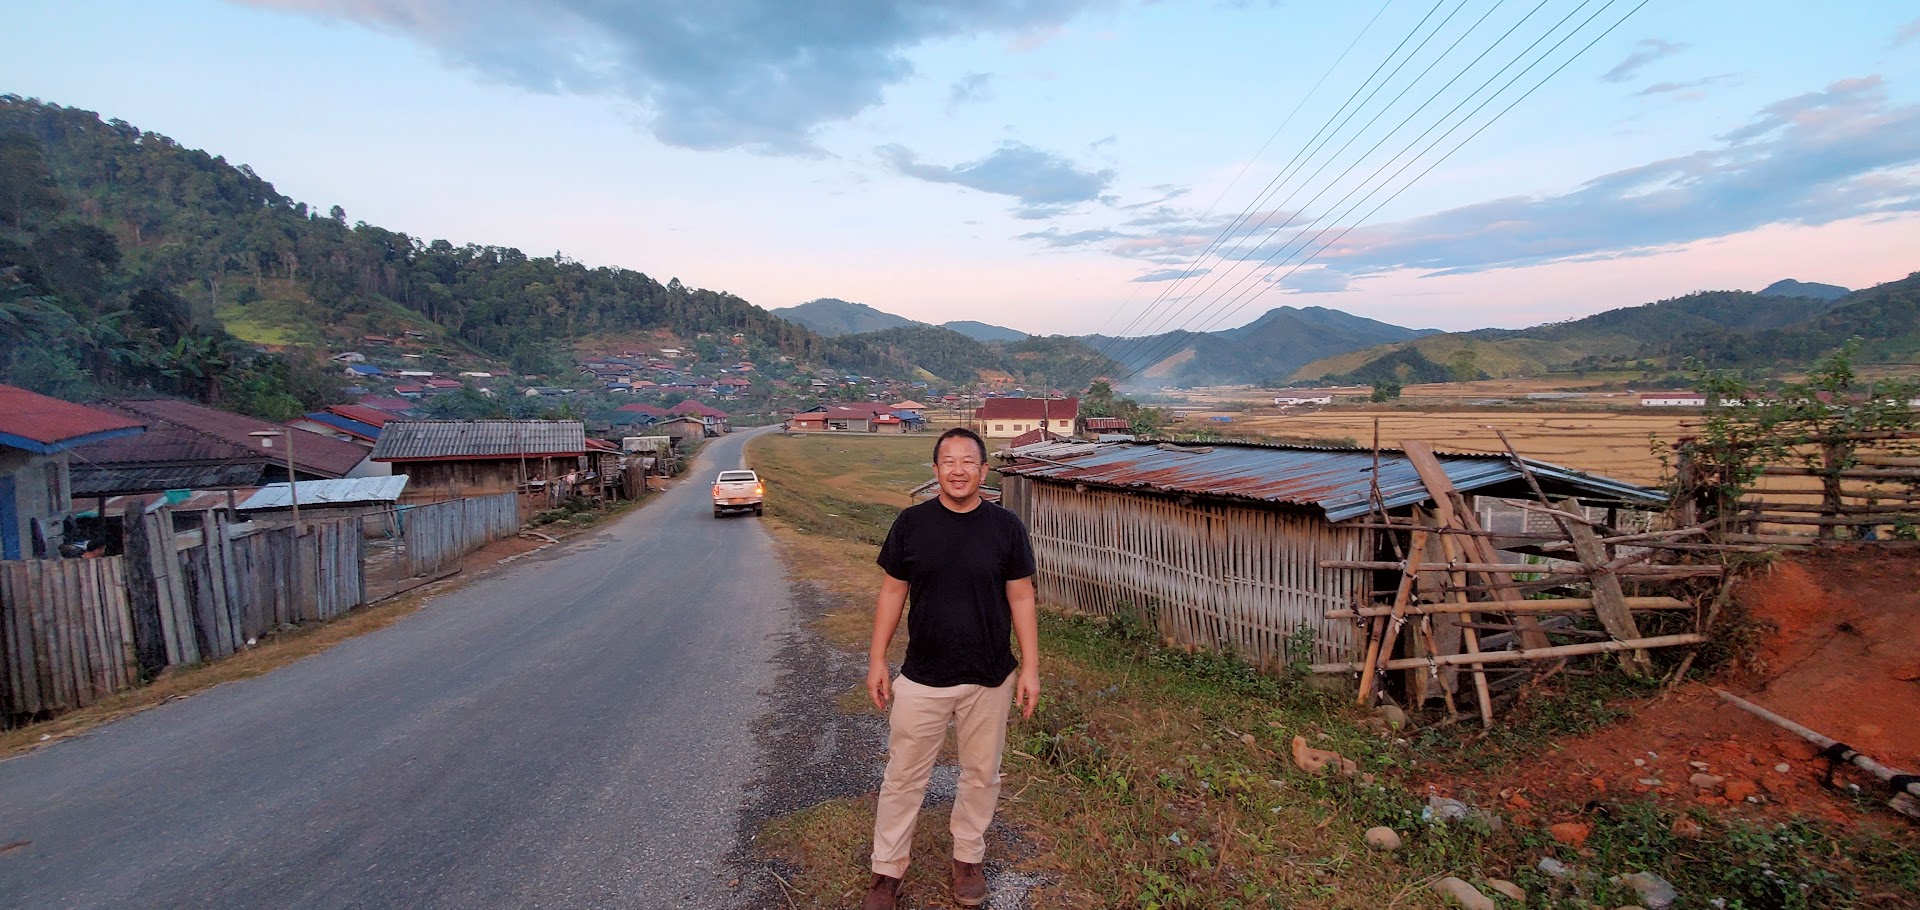 Pao Lor stands on the outskirts of Muang Awe, Laos in November 2022. This is the last village his family lived in before leaving for Thailand. (Courtesy of Pao Lor)